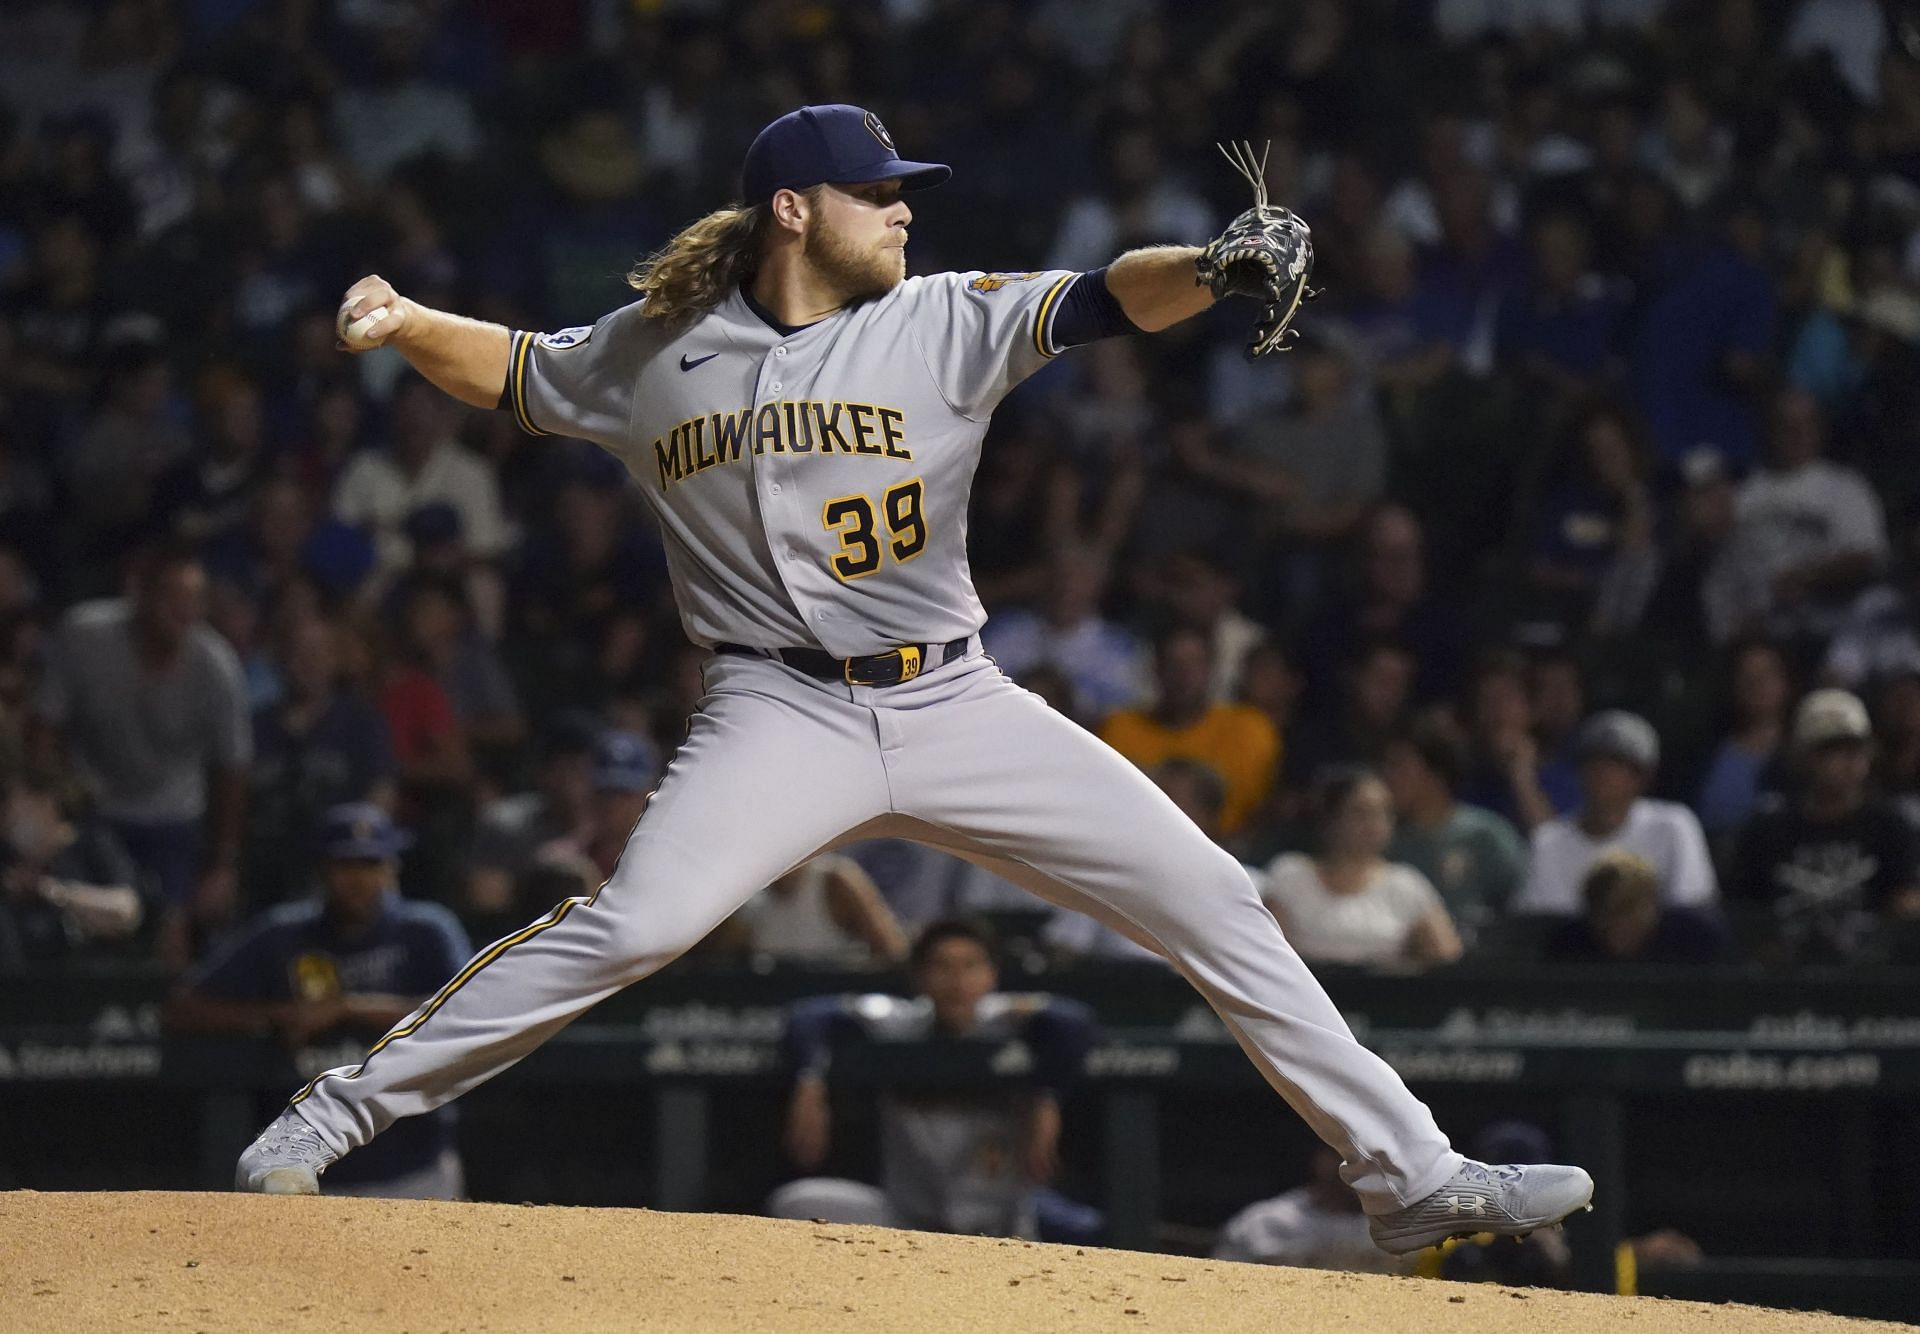 The Flow on Corbin Burnes alone makes him one of the best